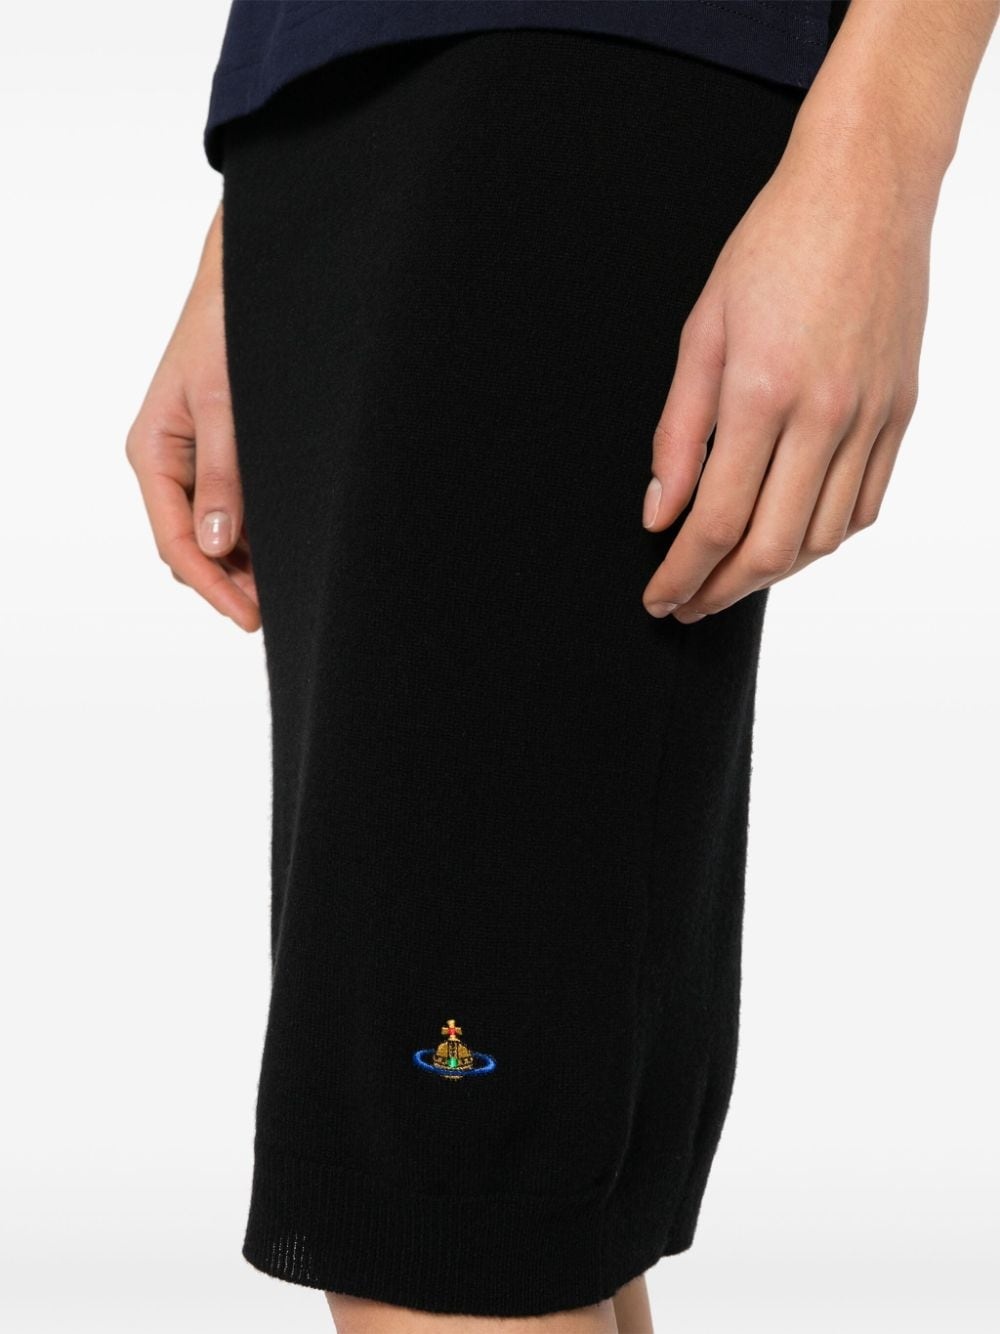 Orb-embroidered skirt - 5